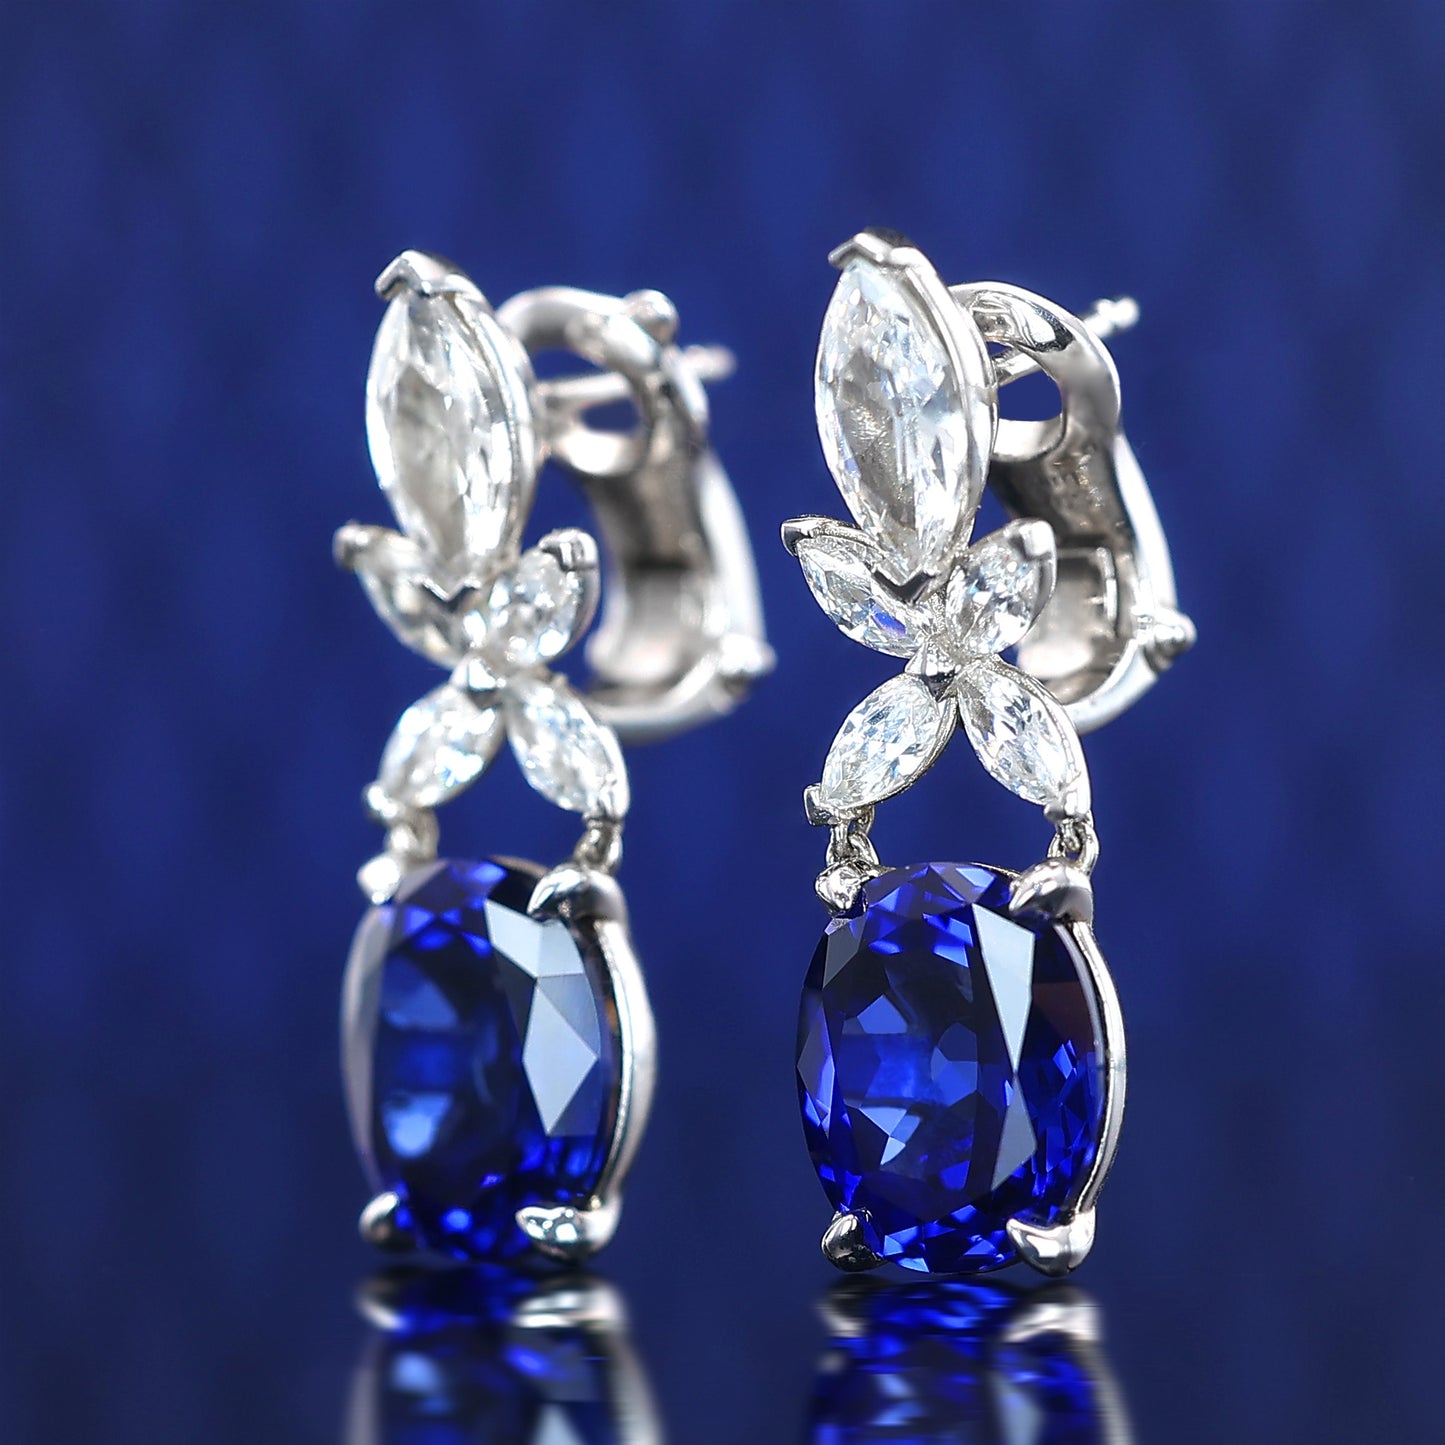 Micro-setting Sapphire color Lab created stones marquise 4 prong earrings, sterling silver